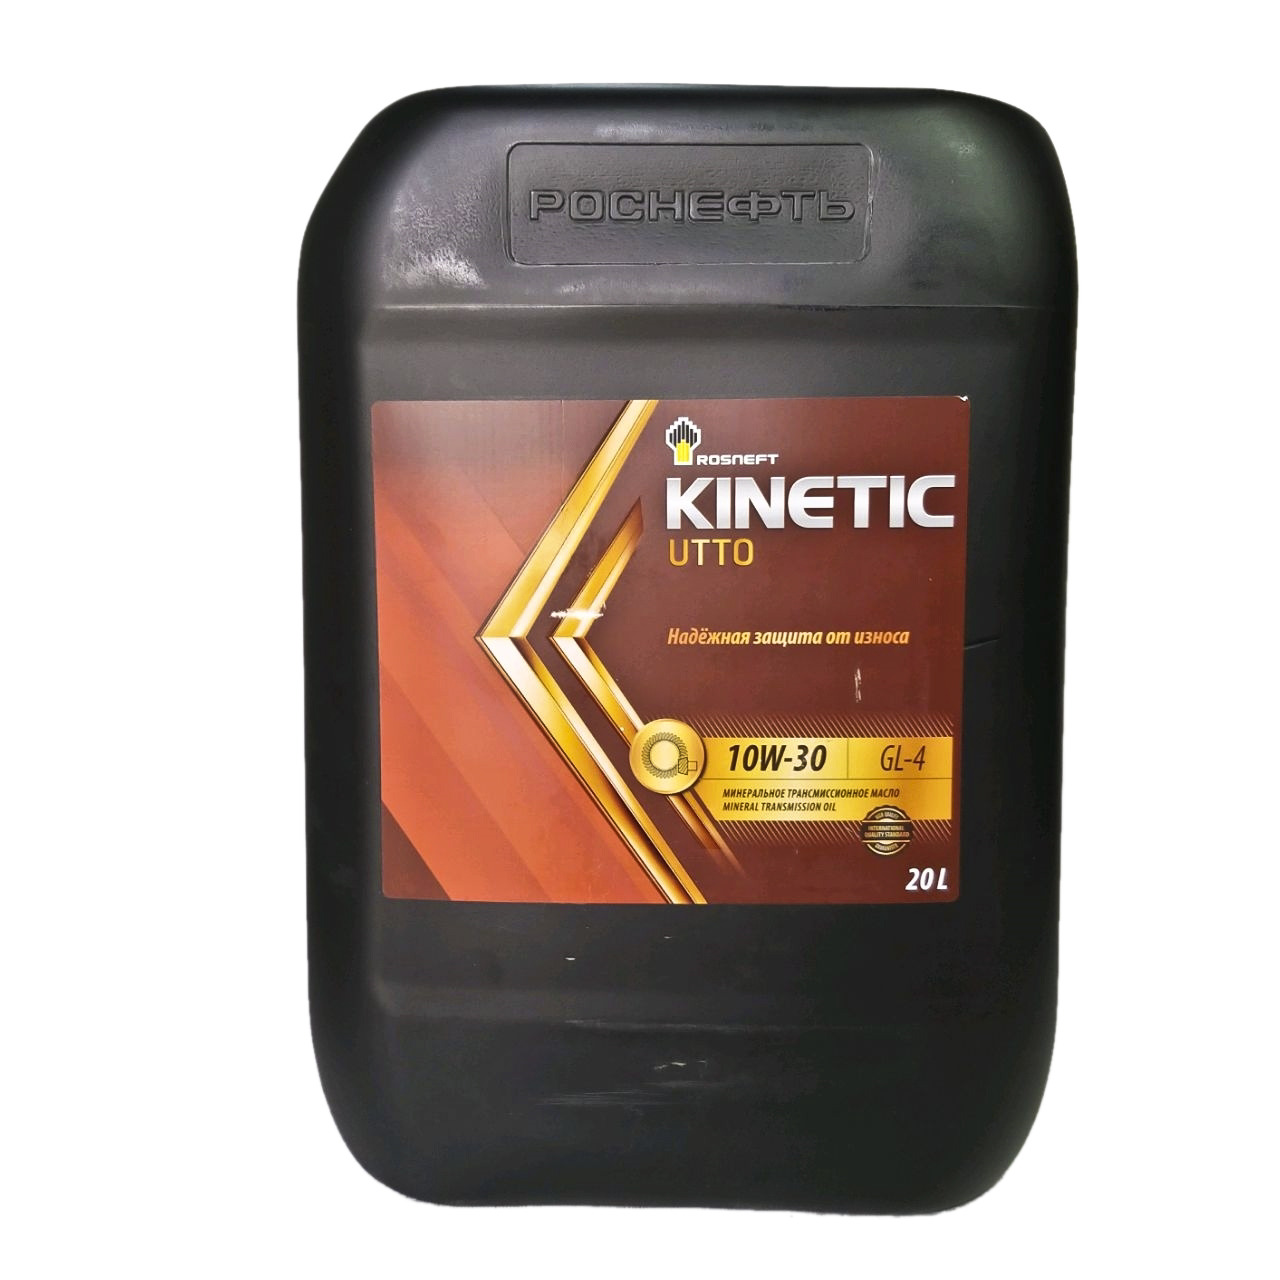 Rosneft Kinetic UTTO 10w-30 (20 L.)